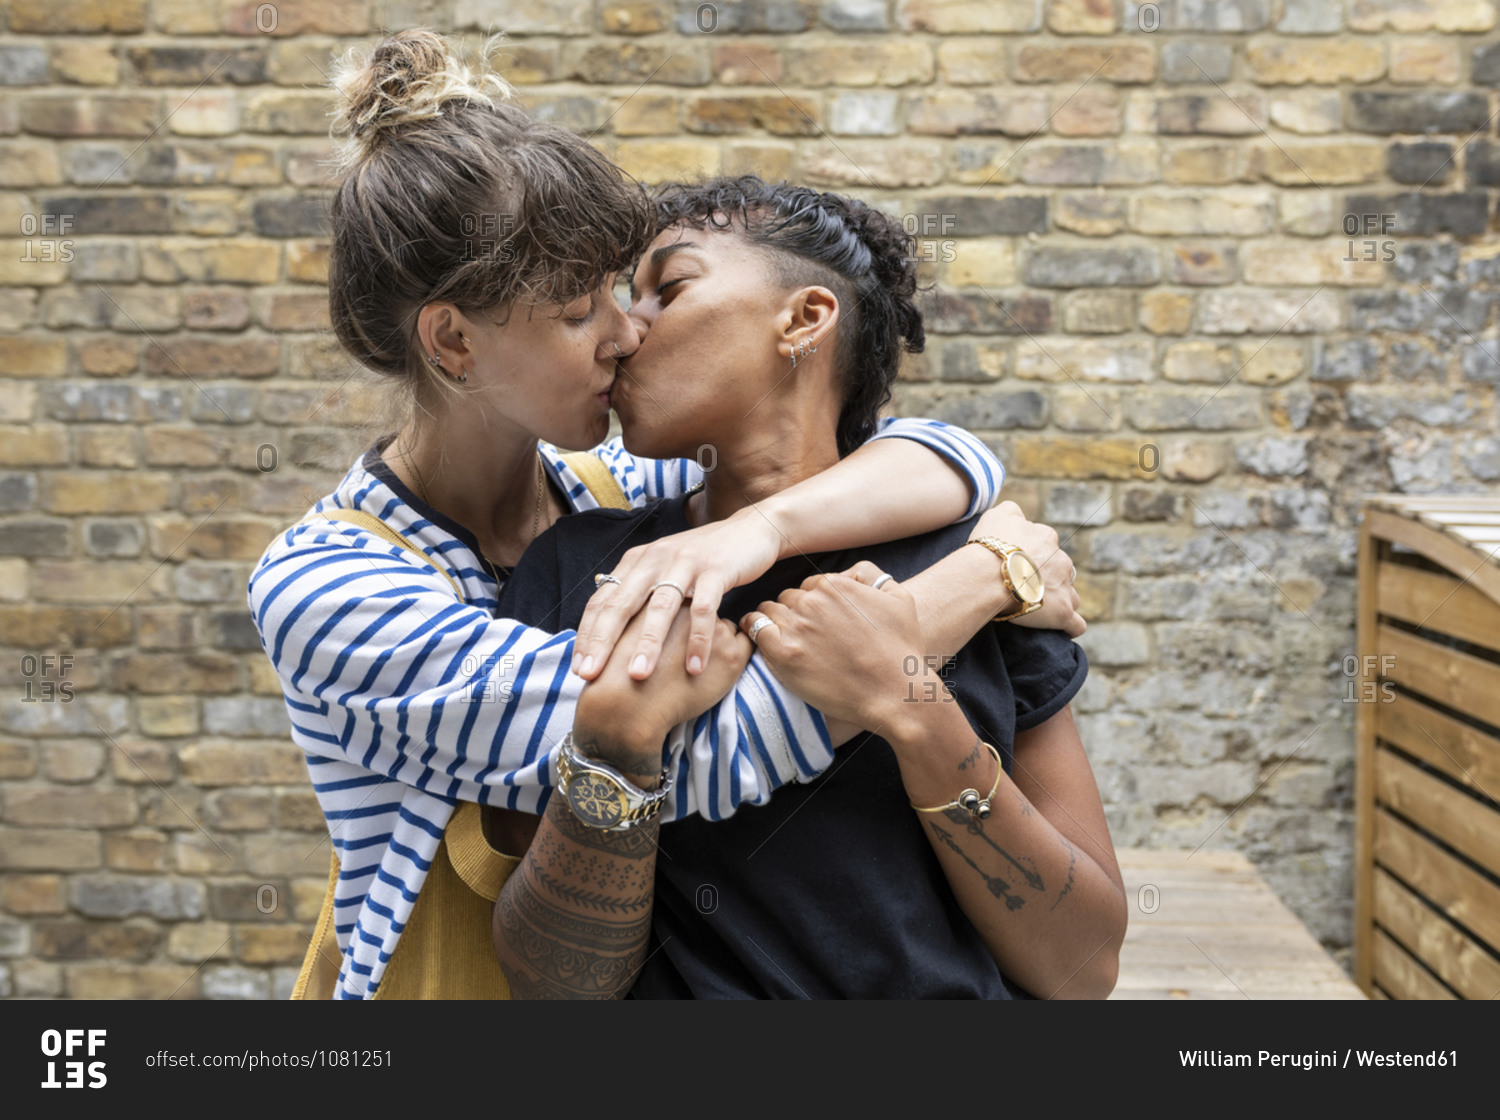 Lesbian Couples Posing Nude - Lesbian couple kissing each other while standing at back yard stock photo -  OFFSET